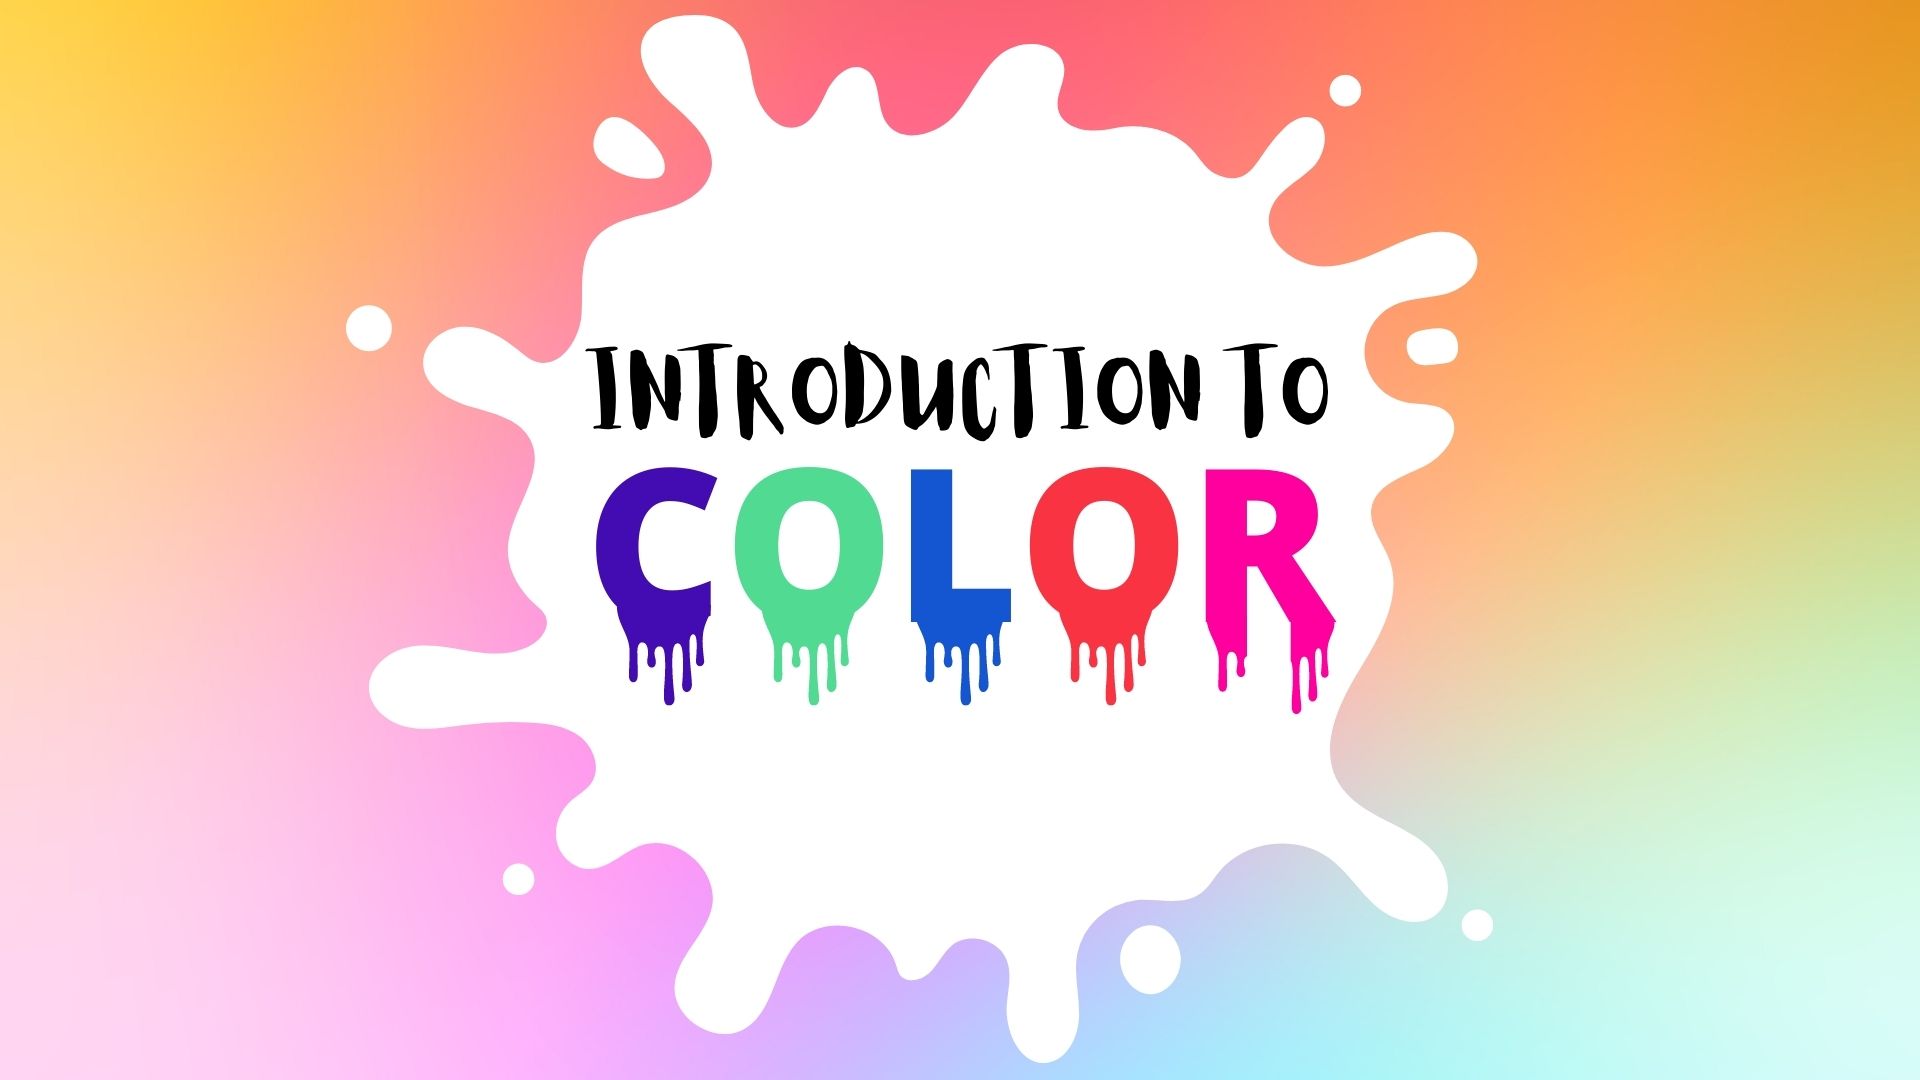 Introduction to Color Course Image